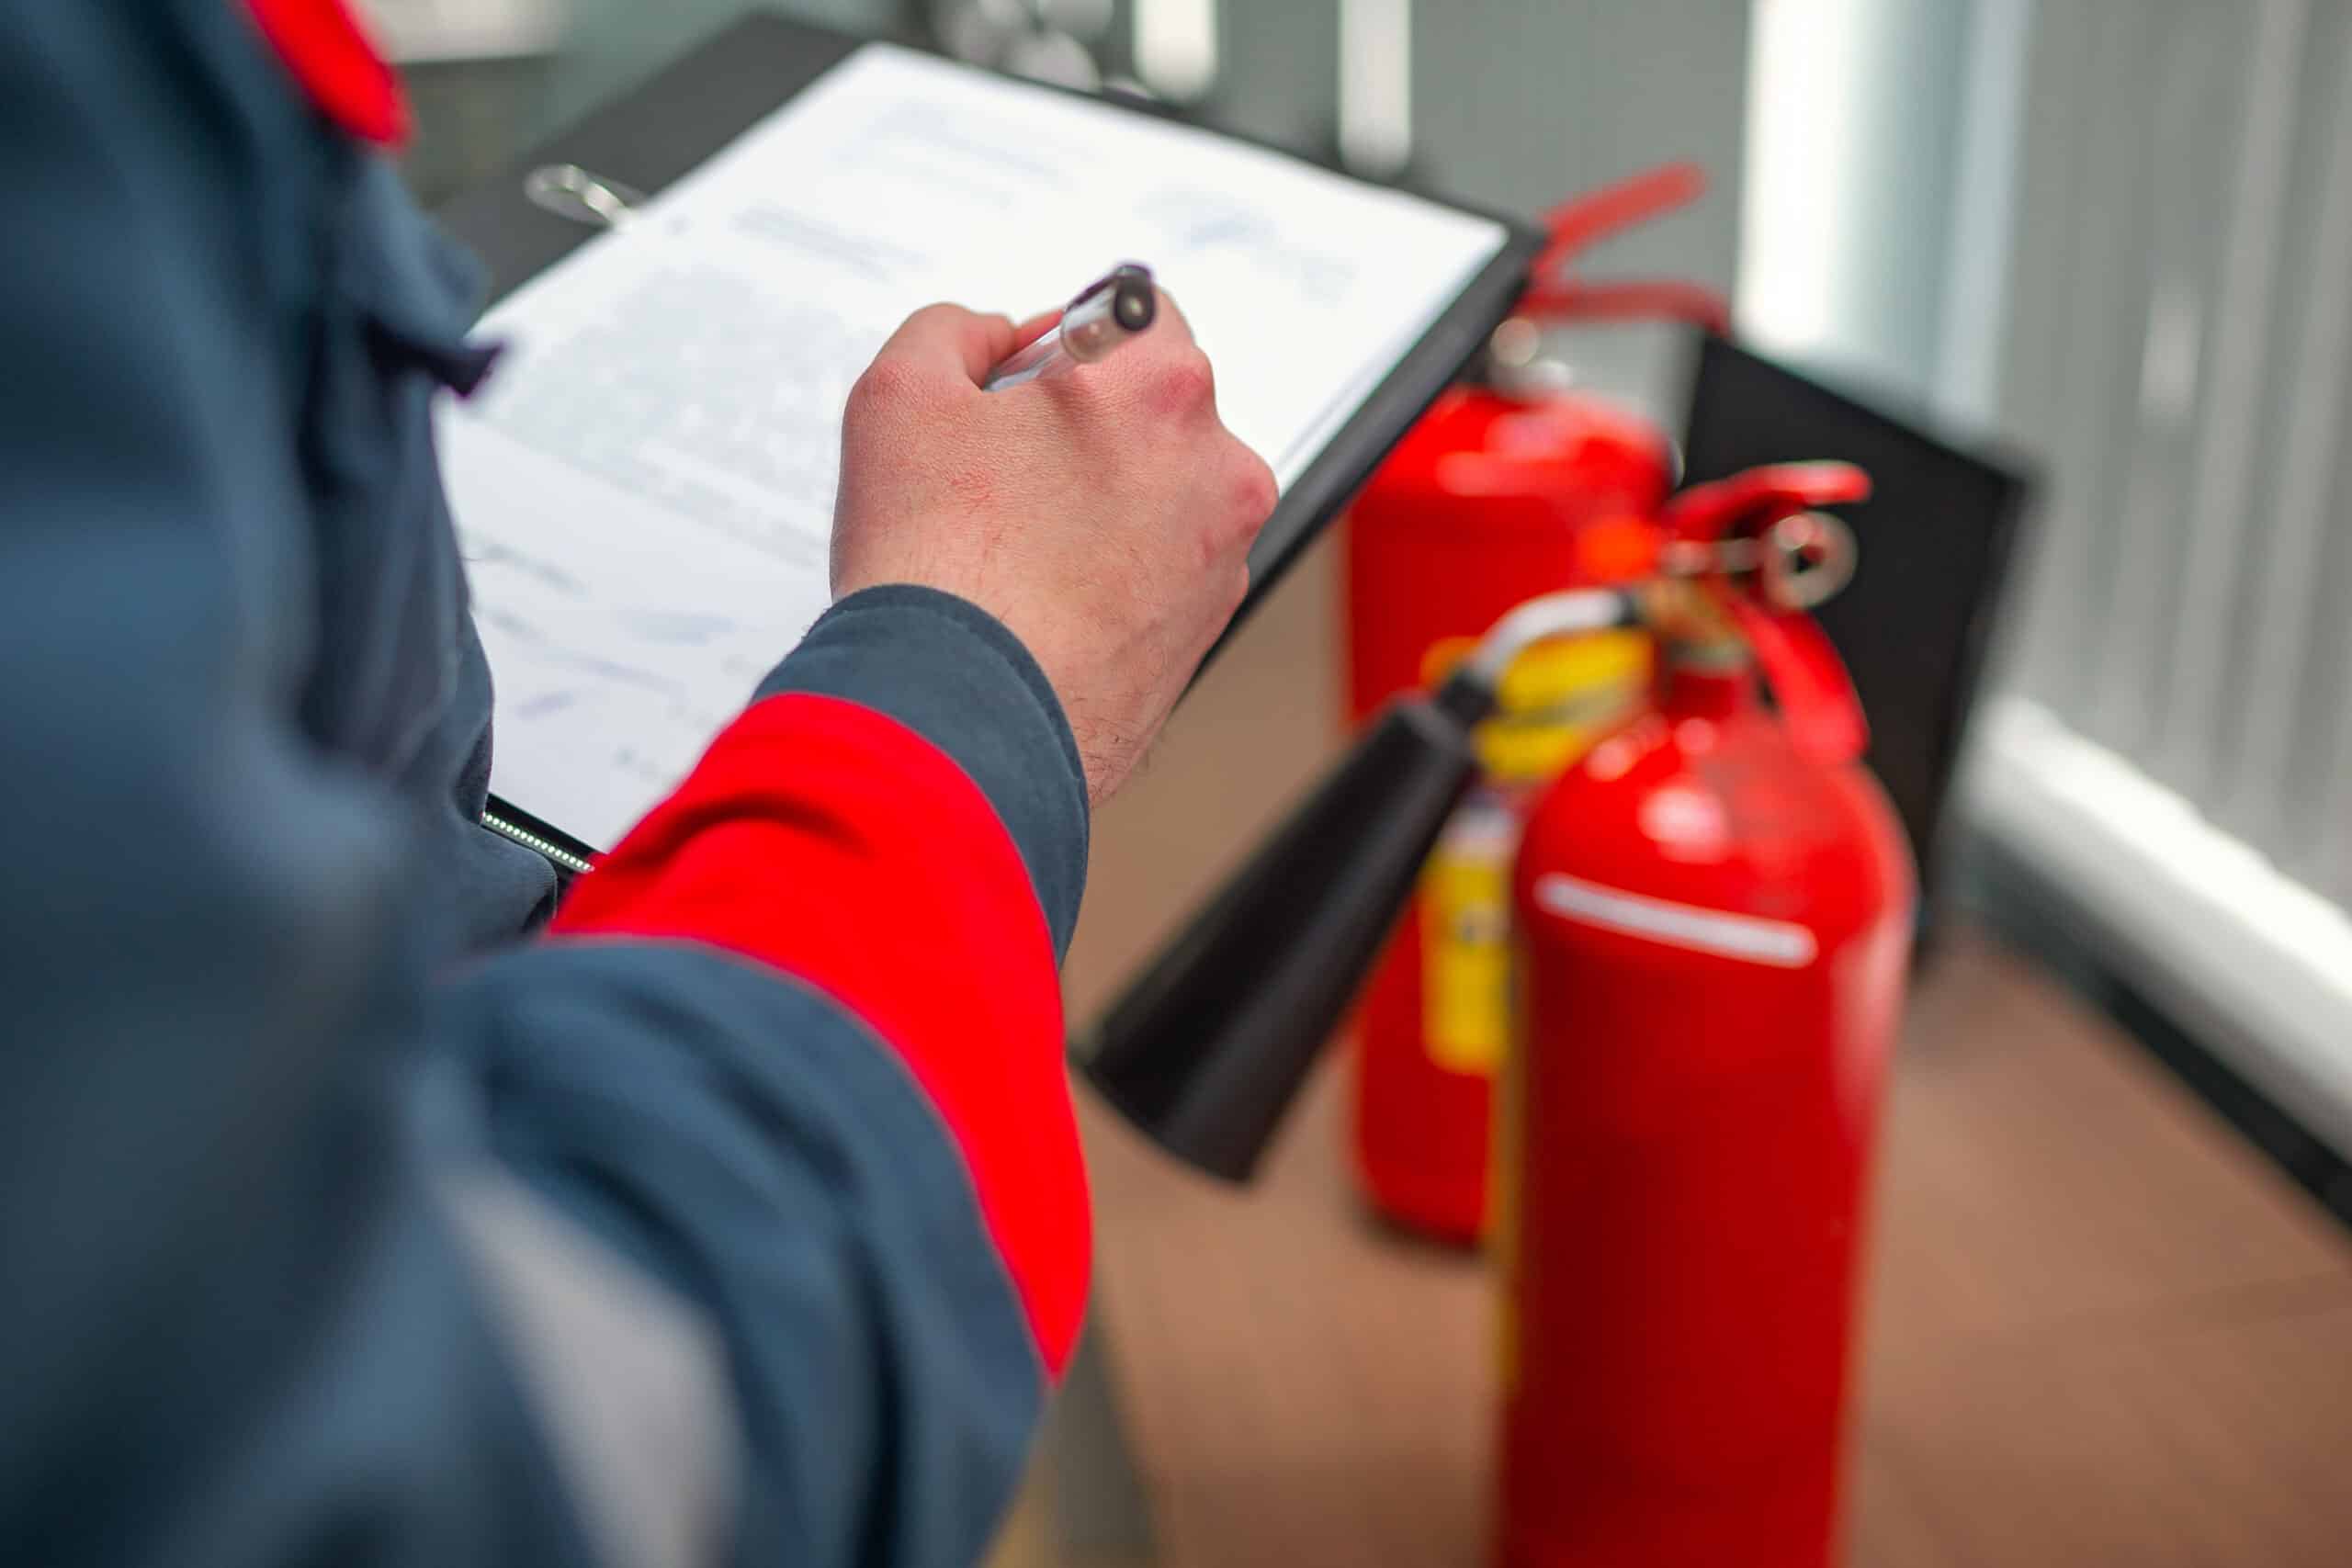 Professional Fire Safety engineering checking fire extinguishers using a clipboard.